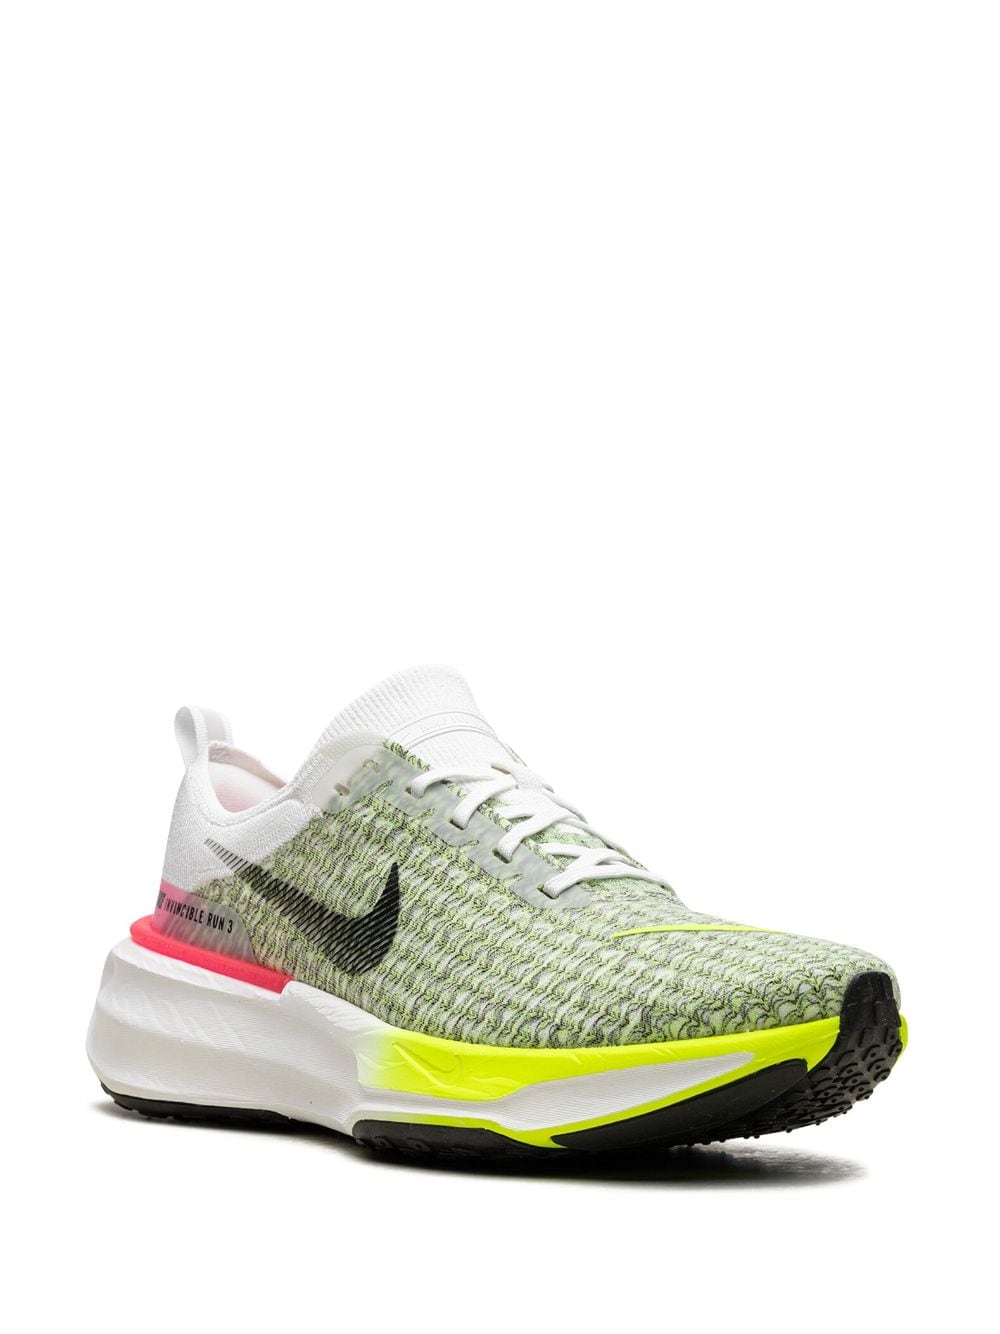 Image 2 of Nike ZoomX Invincible Run 3 "White Volt/Hyper Pink" sneakers